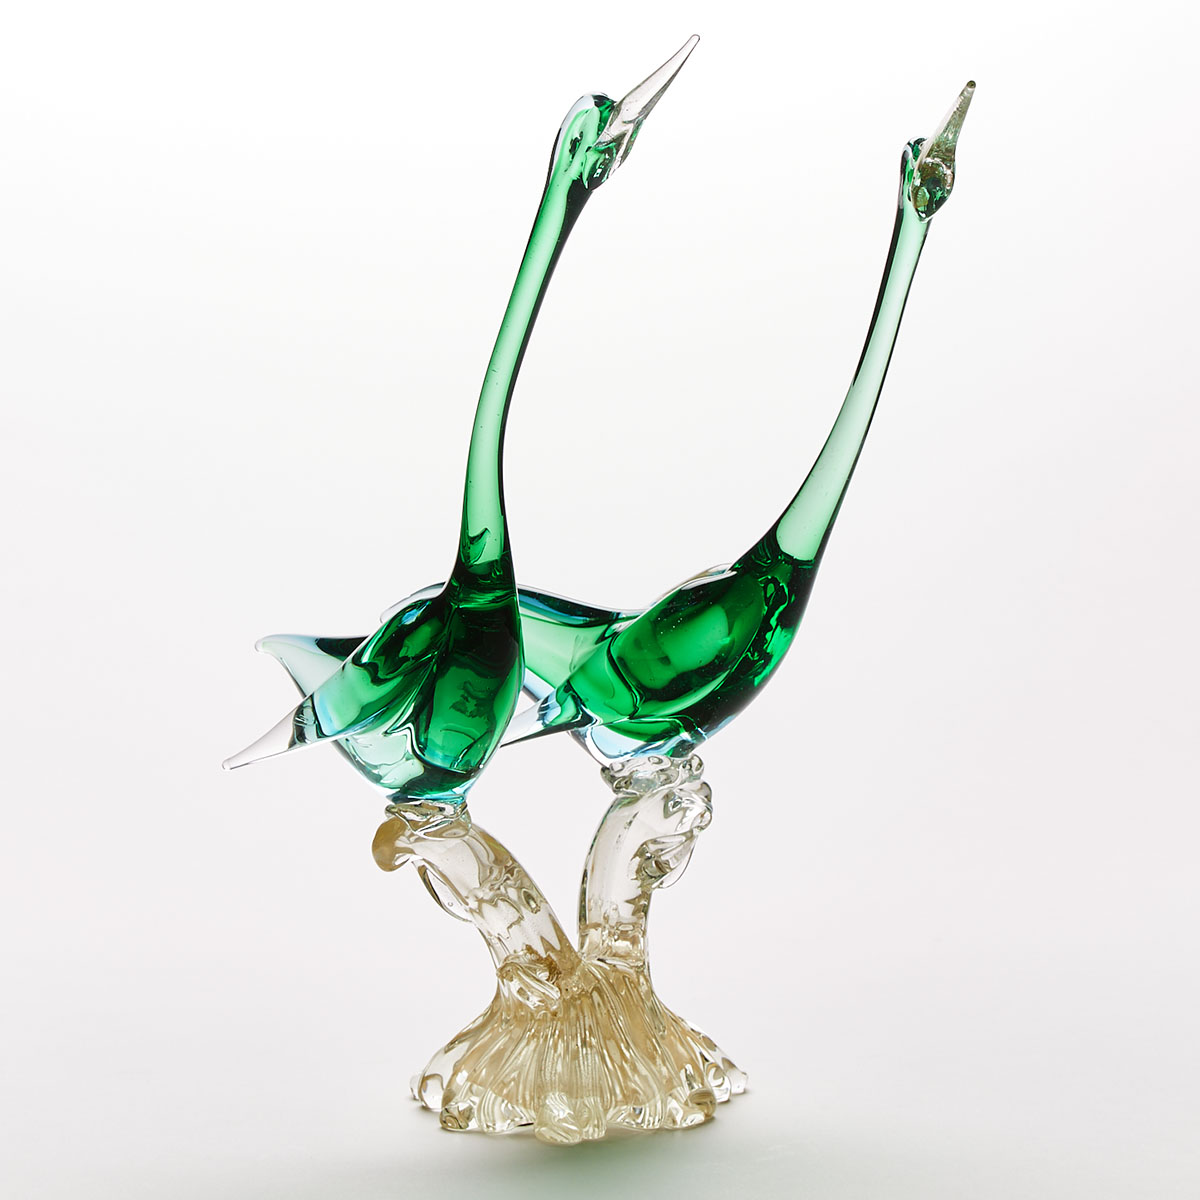 Murano Glass Group of Two Green Cranes, probably Seguso, mid-20th century